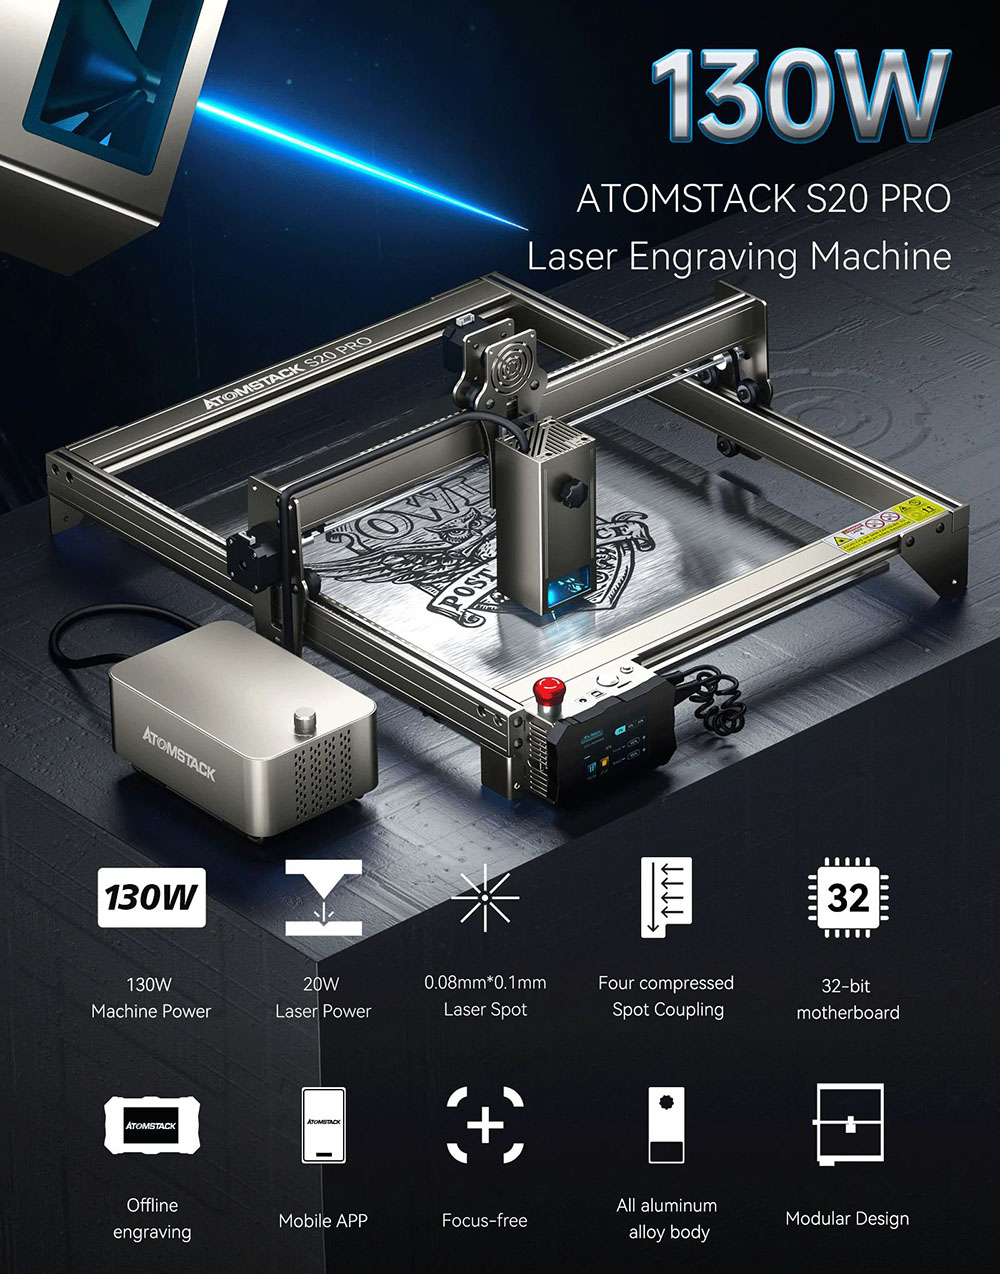 ATOMSTACK S20 Pro 20W Laser Engraver Cutter with Air Assist Kits, Focus Free, Quad-core Diode Laser, Offline Engraving - US